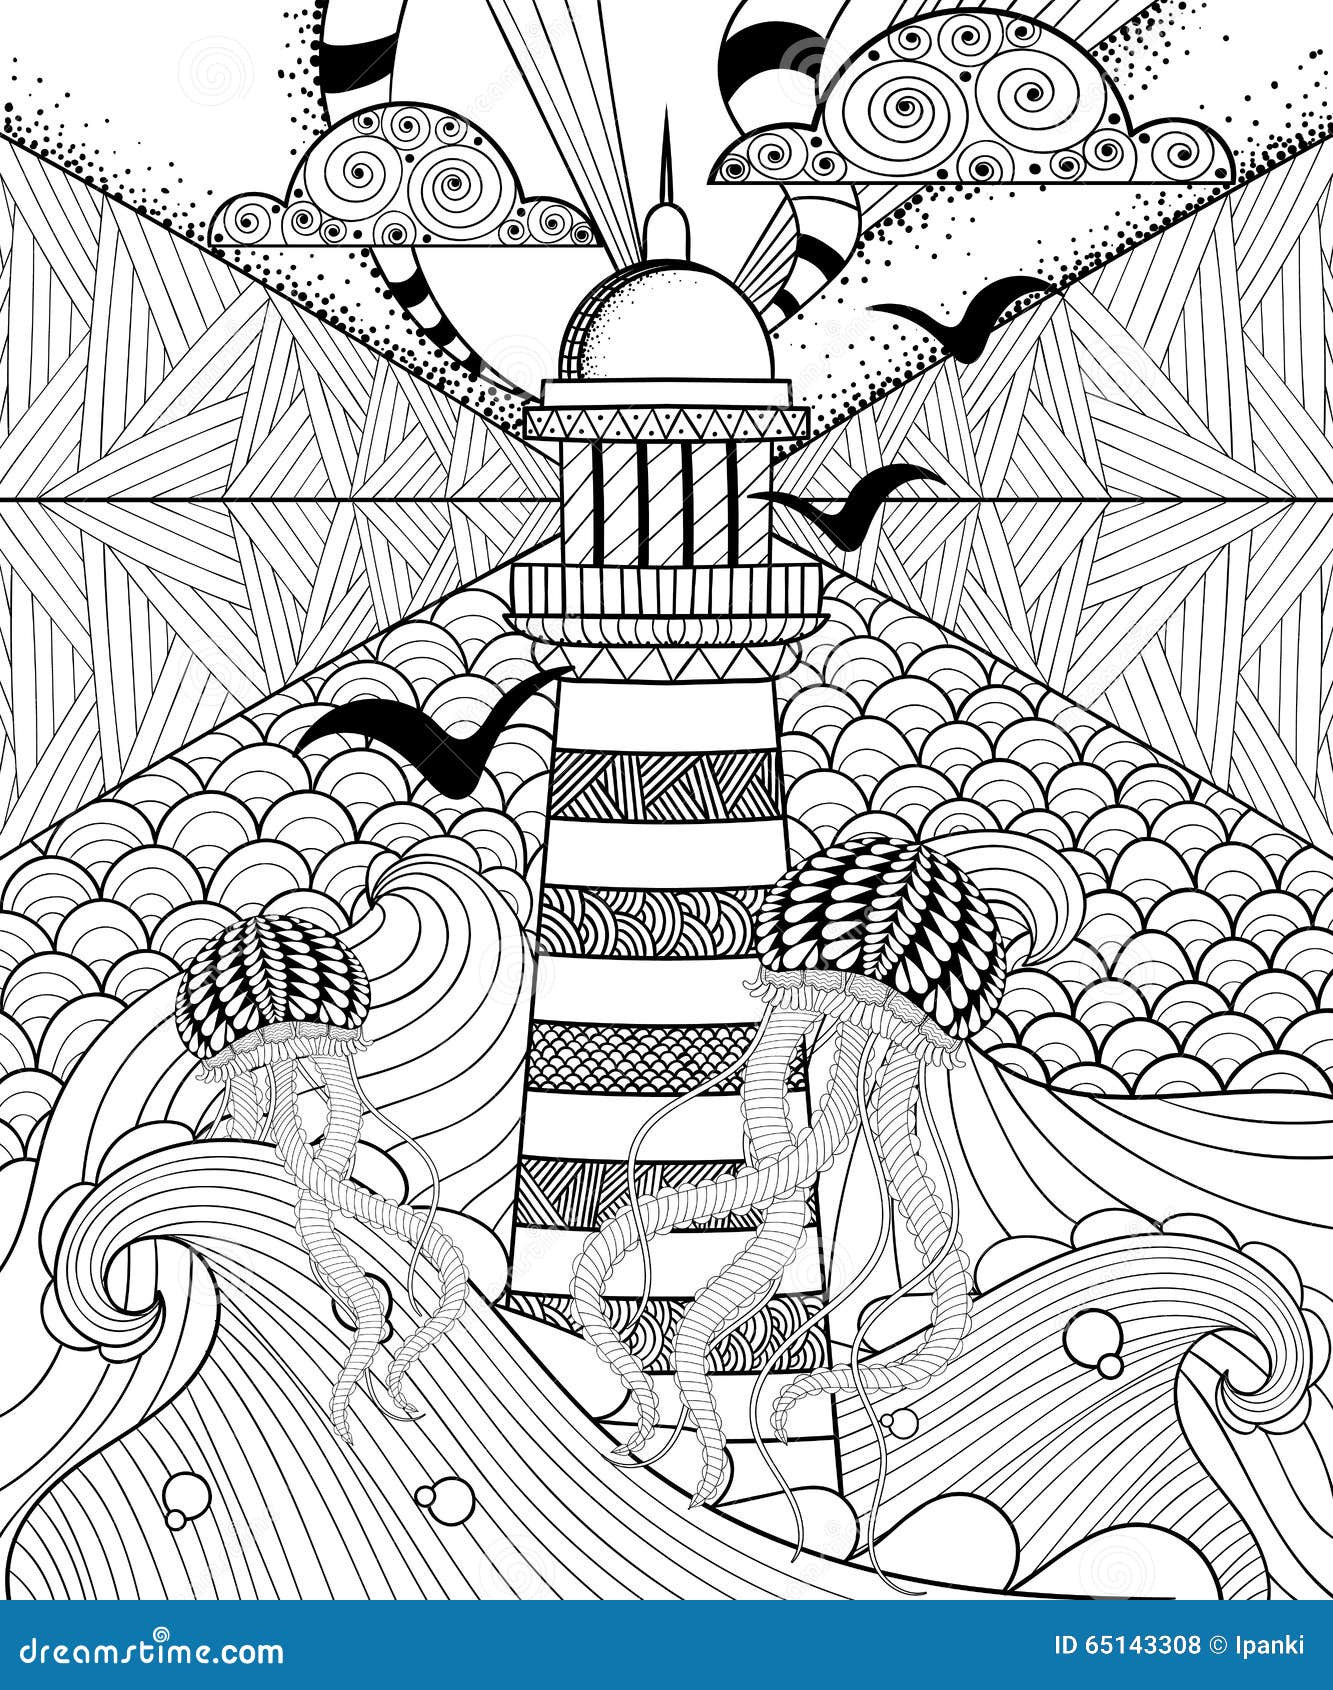 Adult coloring lighthouse stock illustrations â adult coloring lighthouse stock illustrations vectors clipart